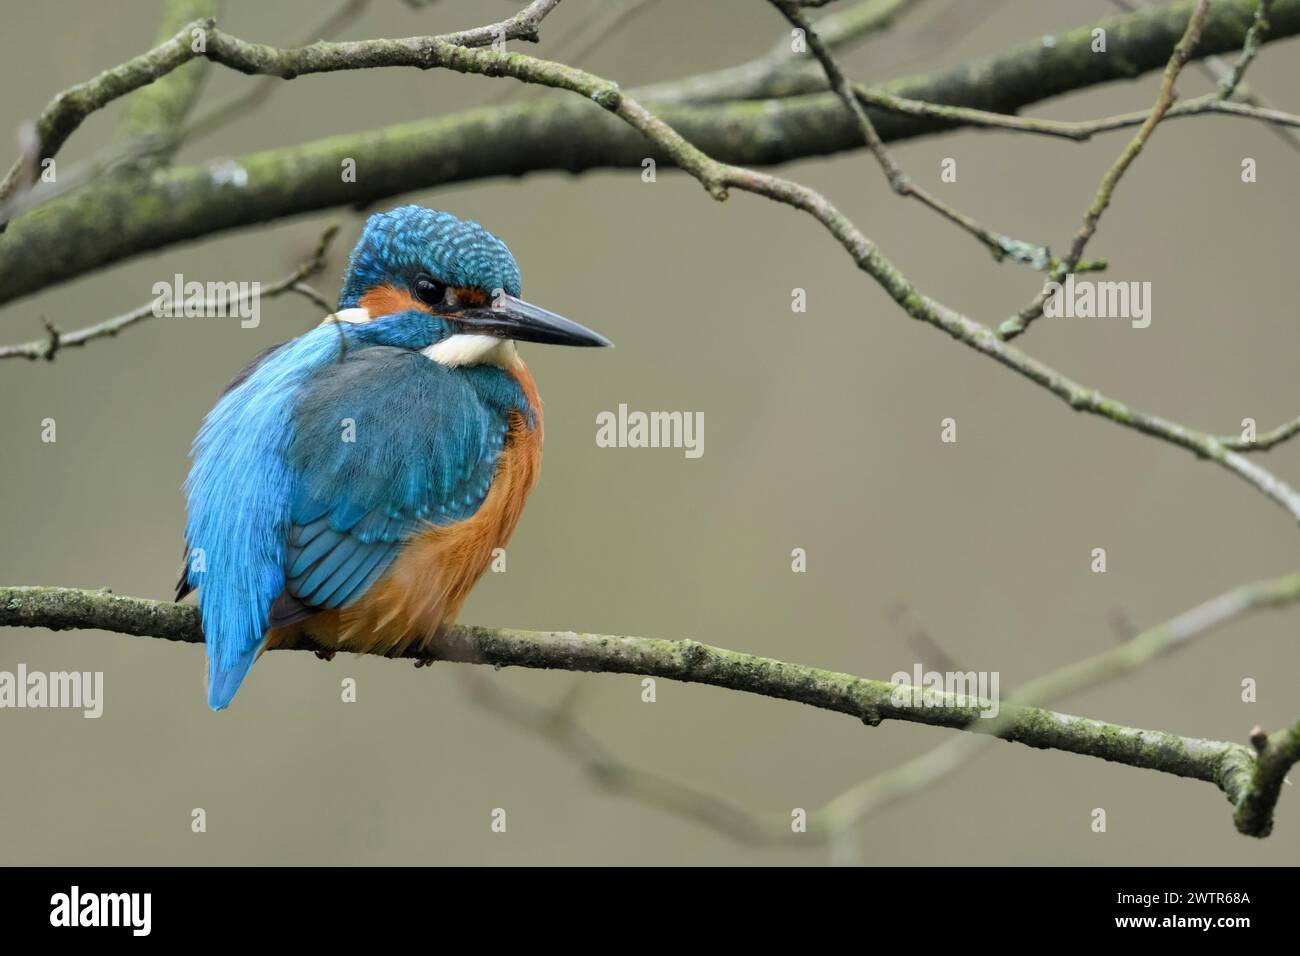 Eurasian Kingfisher ( Alcedo atthis ), male, perched in a tree, on a natural branch in the shrubbery, natural setting, watching around, wildlife, Euro Stock Photo